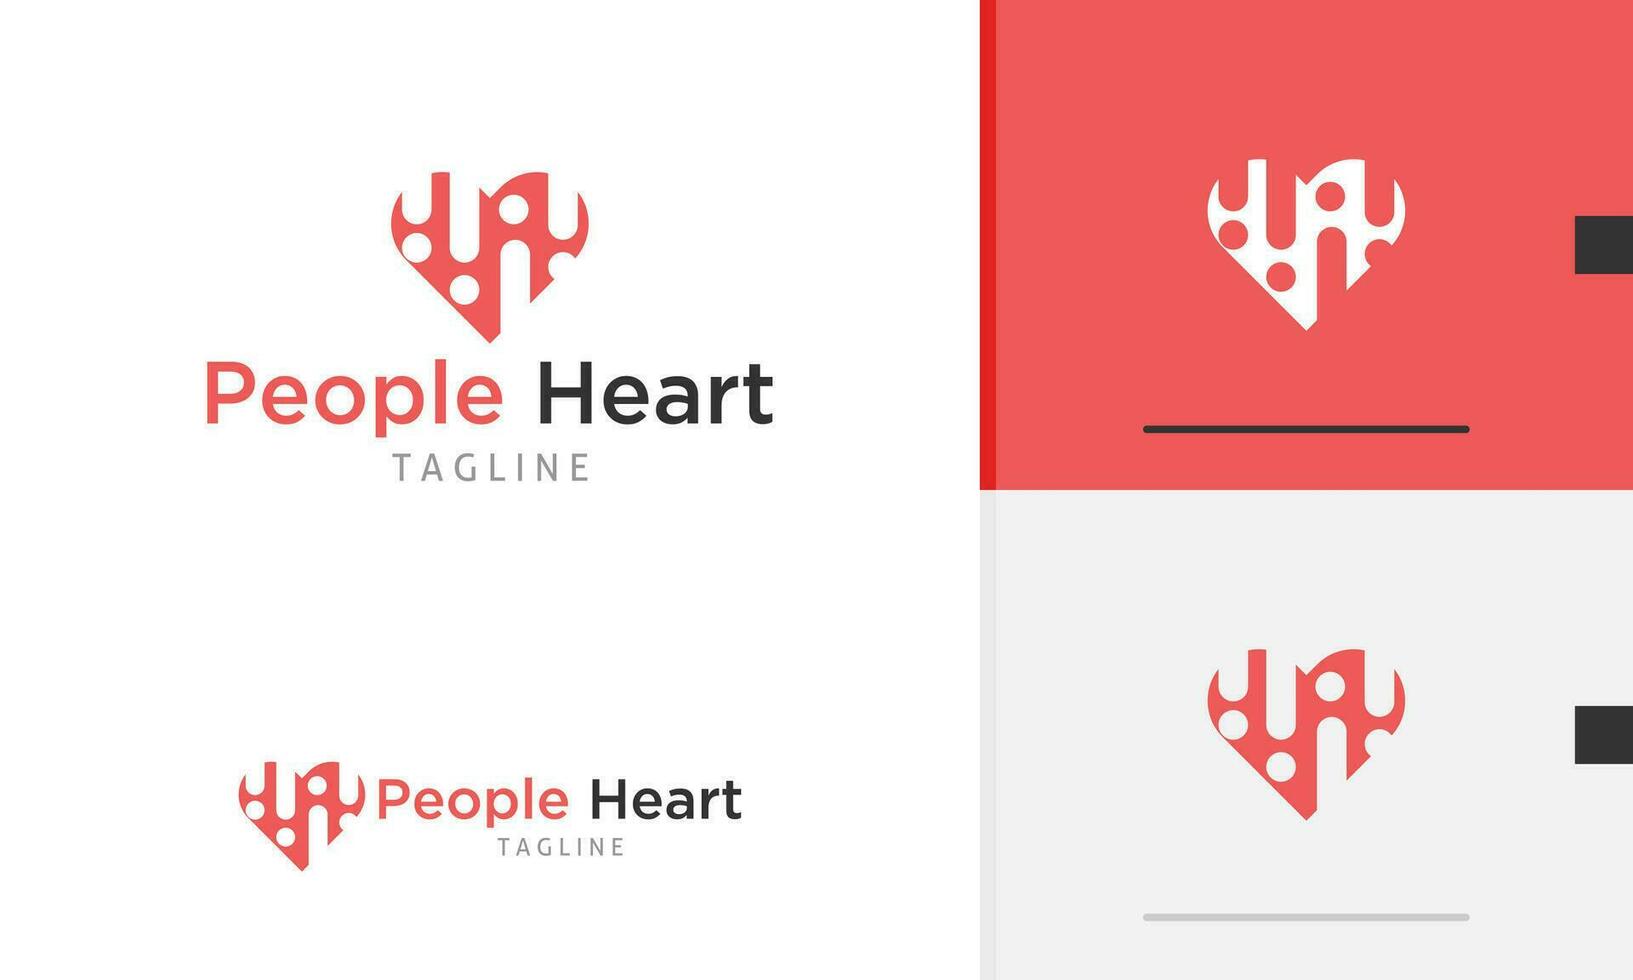 Logo design icon of heart love shape with silhouette of people person health care help community vector